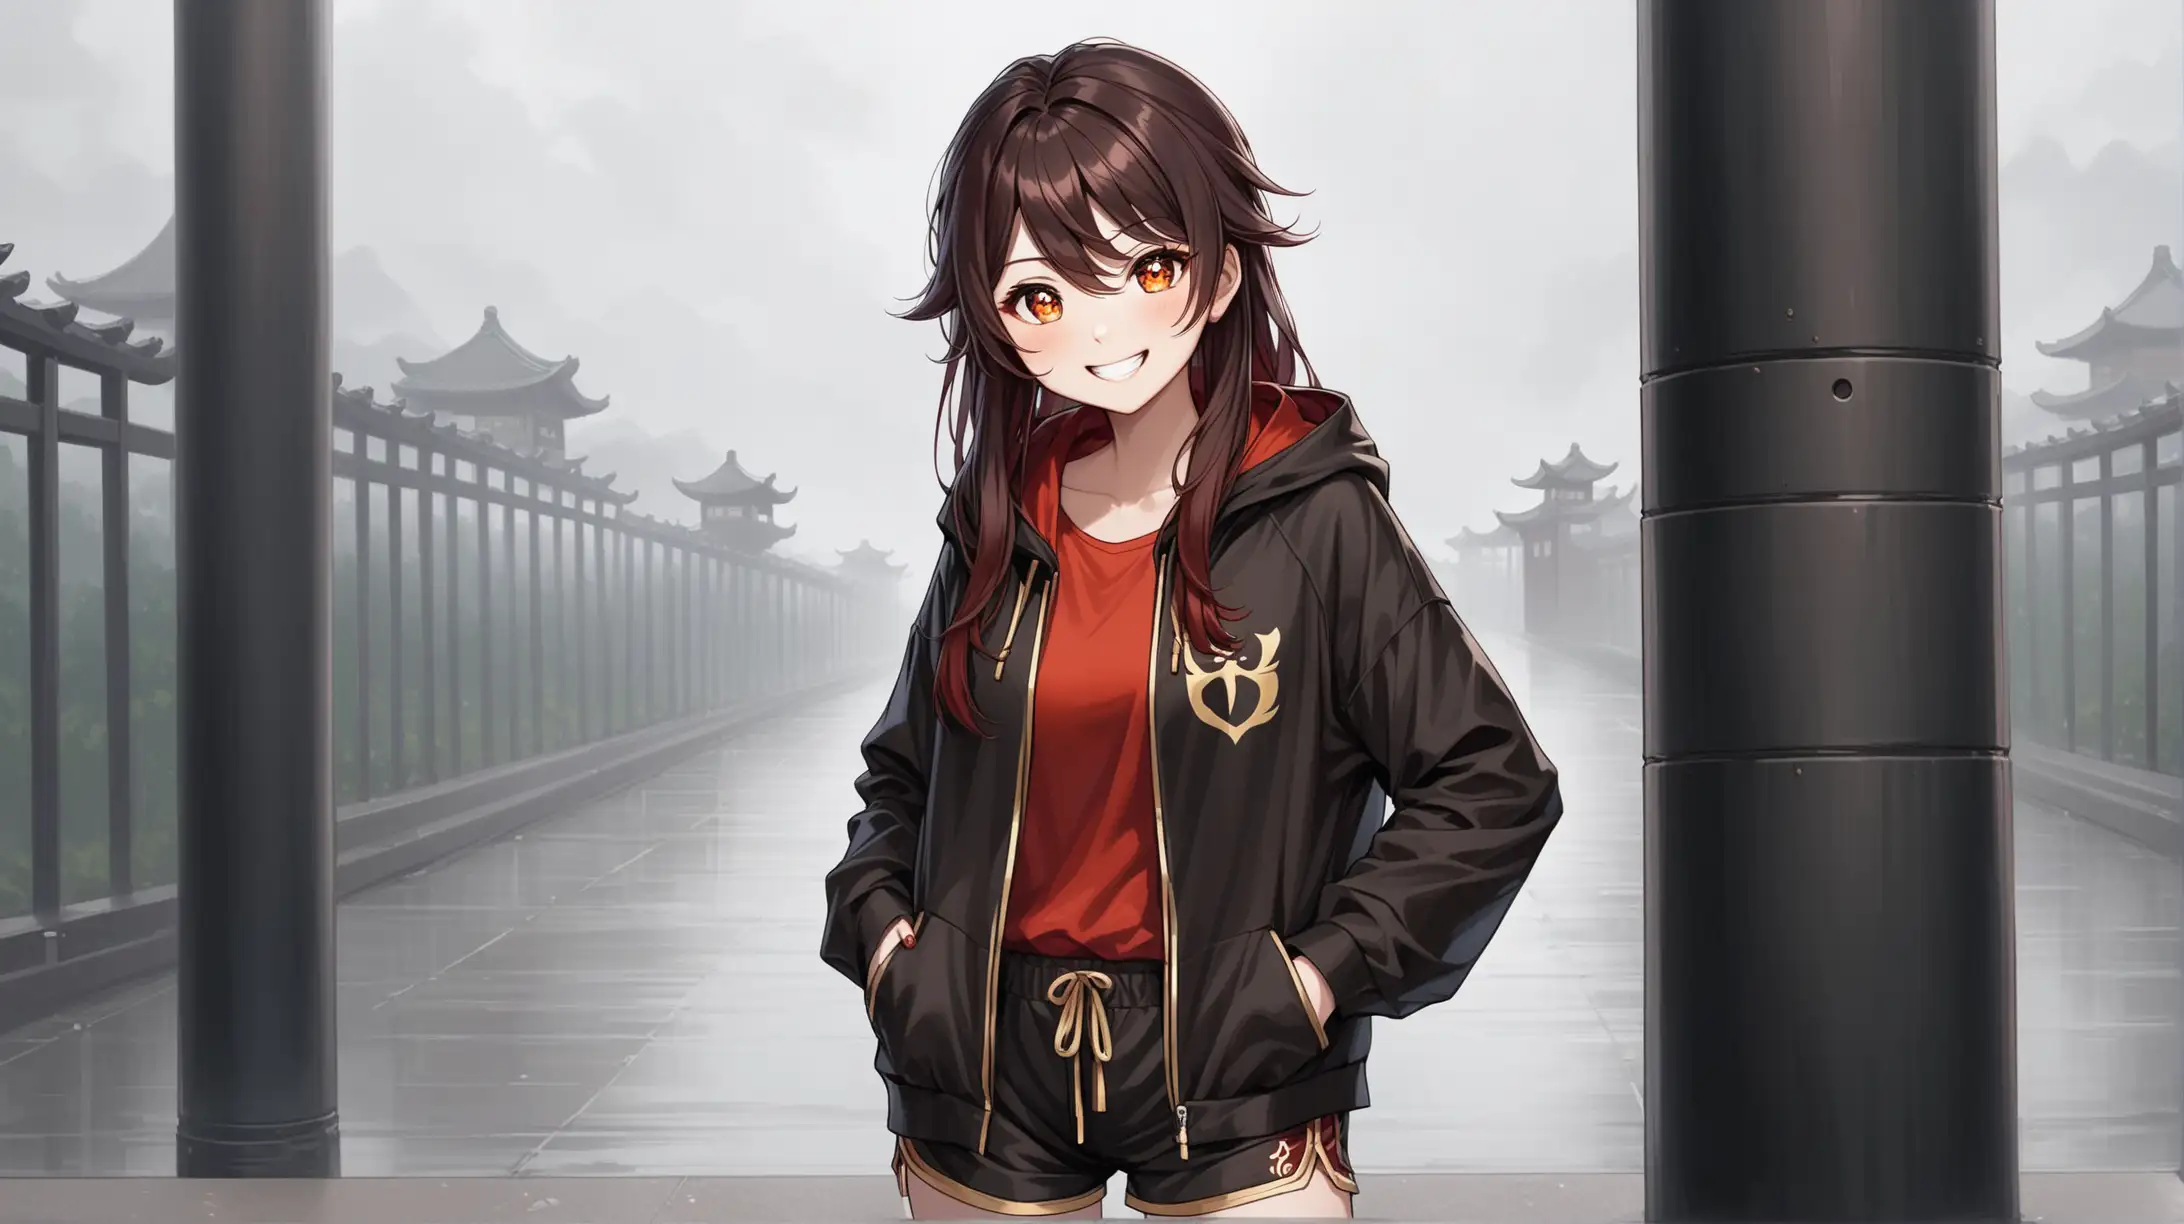 Draw the character Hu Tao, standing alone in a striking post, outside on an overcast day, wearing shorts and a jacket, she is smiling at the viewer